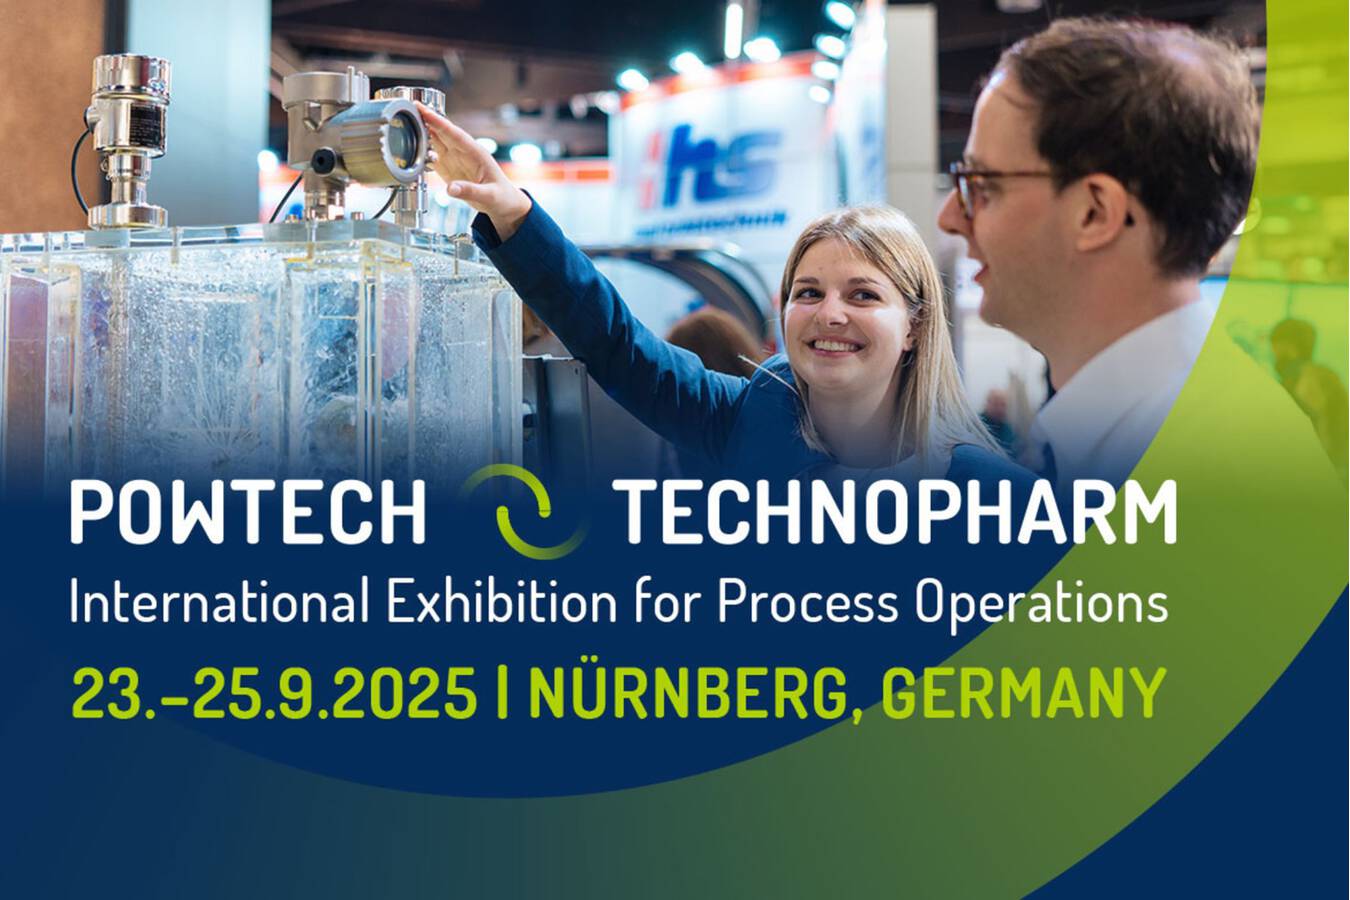 Powtech Technopharm 2025: Kick-off with a new design The Leading International Processing Trade Fair for Powder, Bulk Solids, Fluids and Liquids,  23 - 25 September 2025 in Nuremberg, has a new look.